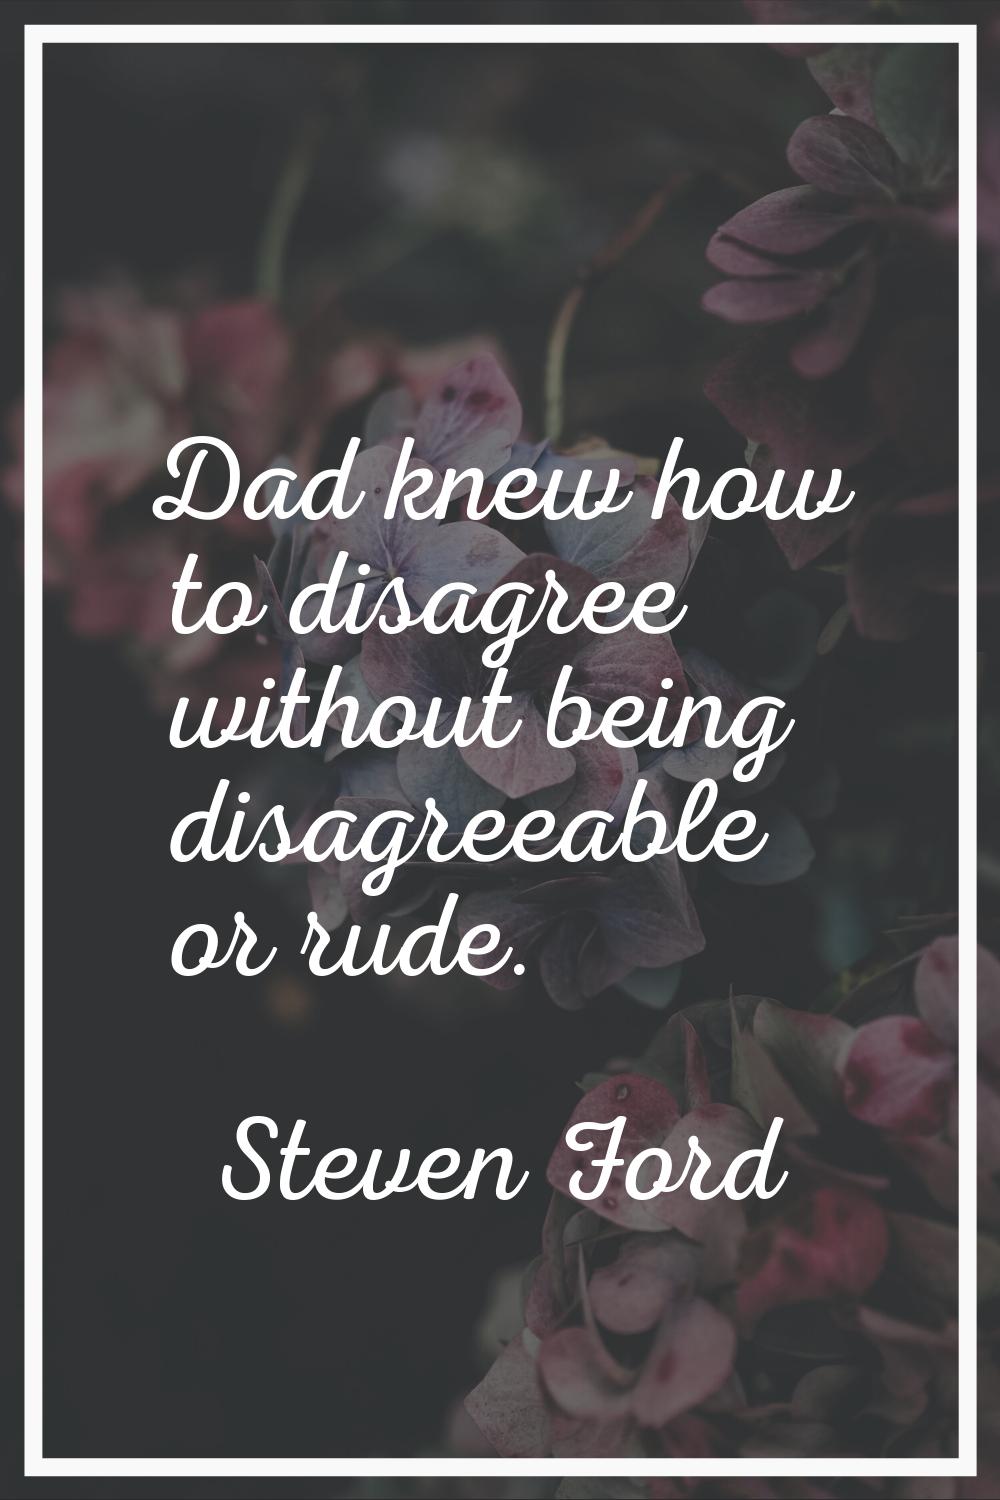 Dad knew how to disagree without being disagreeable or rude.